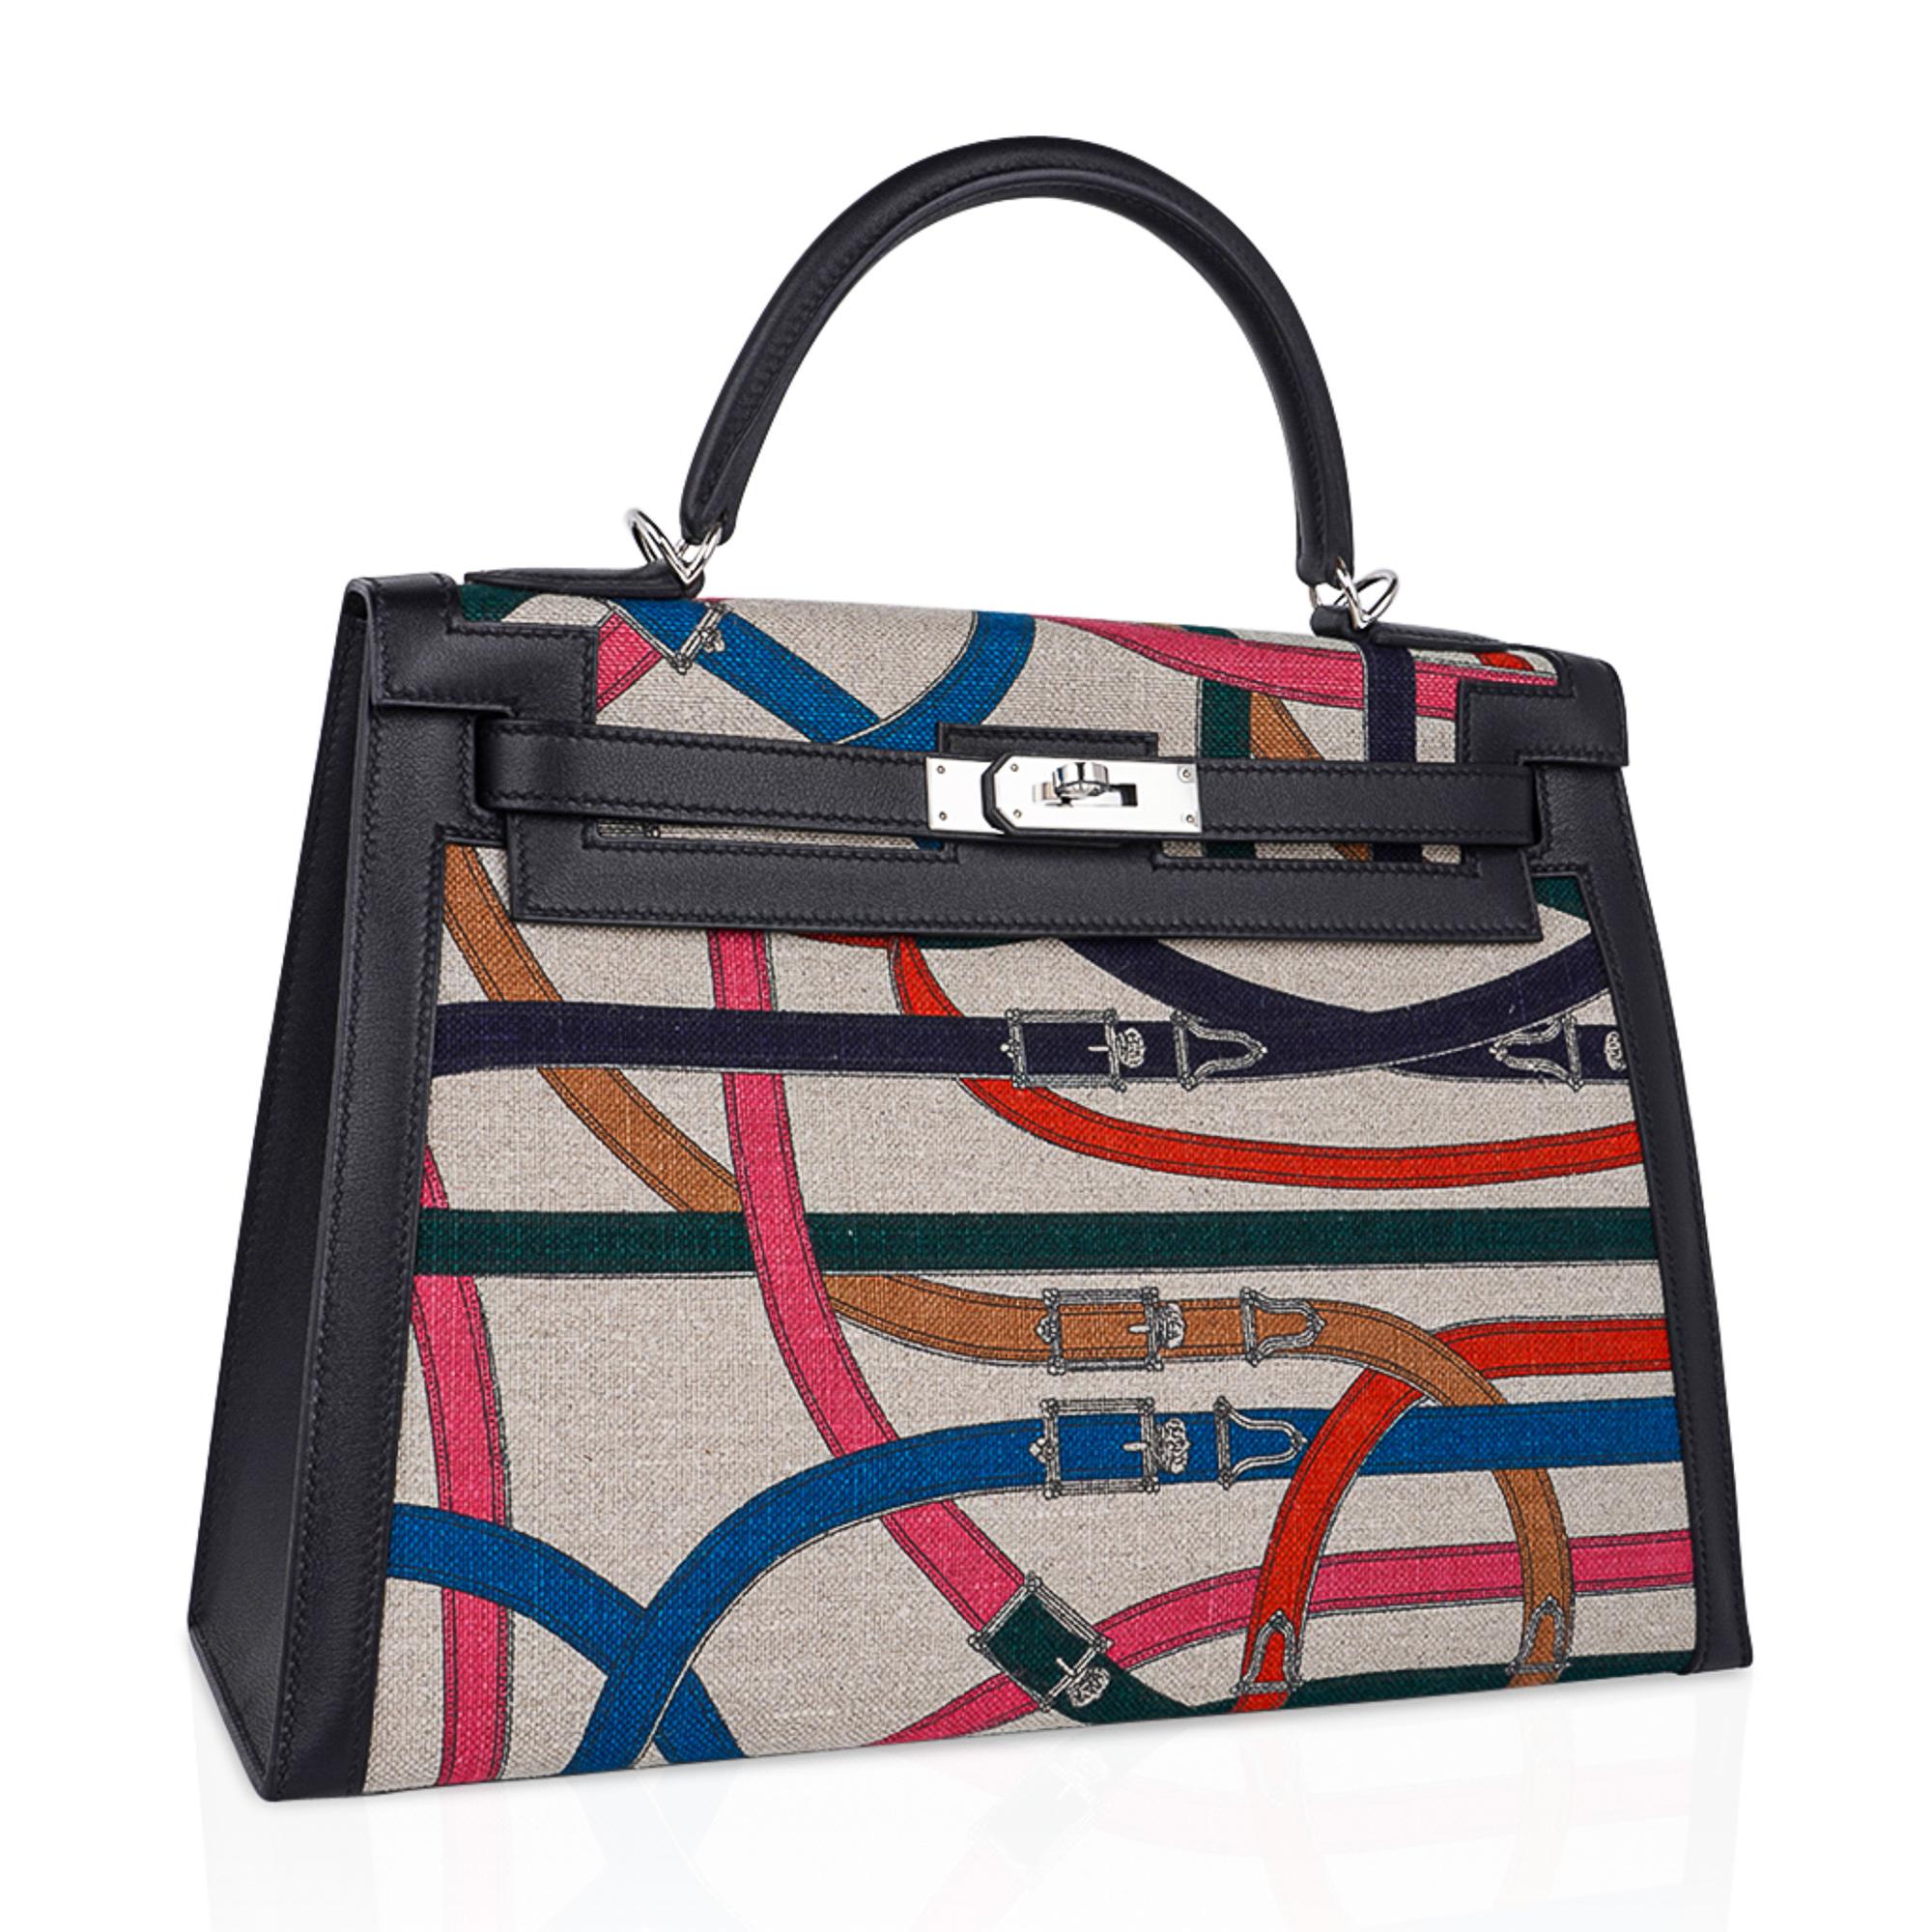 Mightychic offers an Hermes Kelly Sellier Cavalcadour  32 bag.
This striking Limited Edition Kelly bag is featured in washed Toile de Camp and and black swift leather.
Each one of these extremely limited production beauties has a unique one of kind